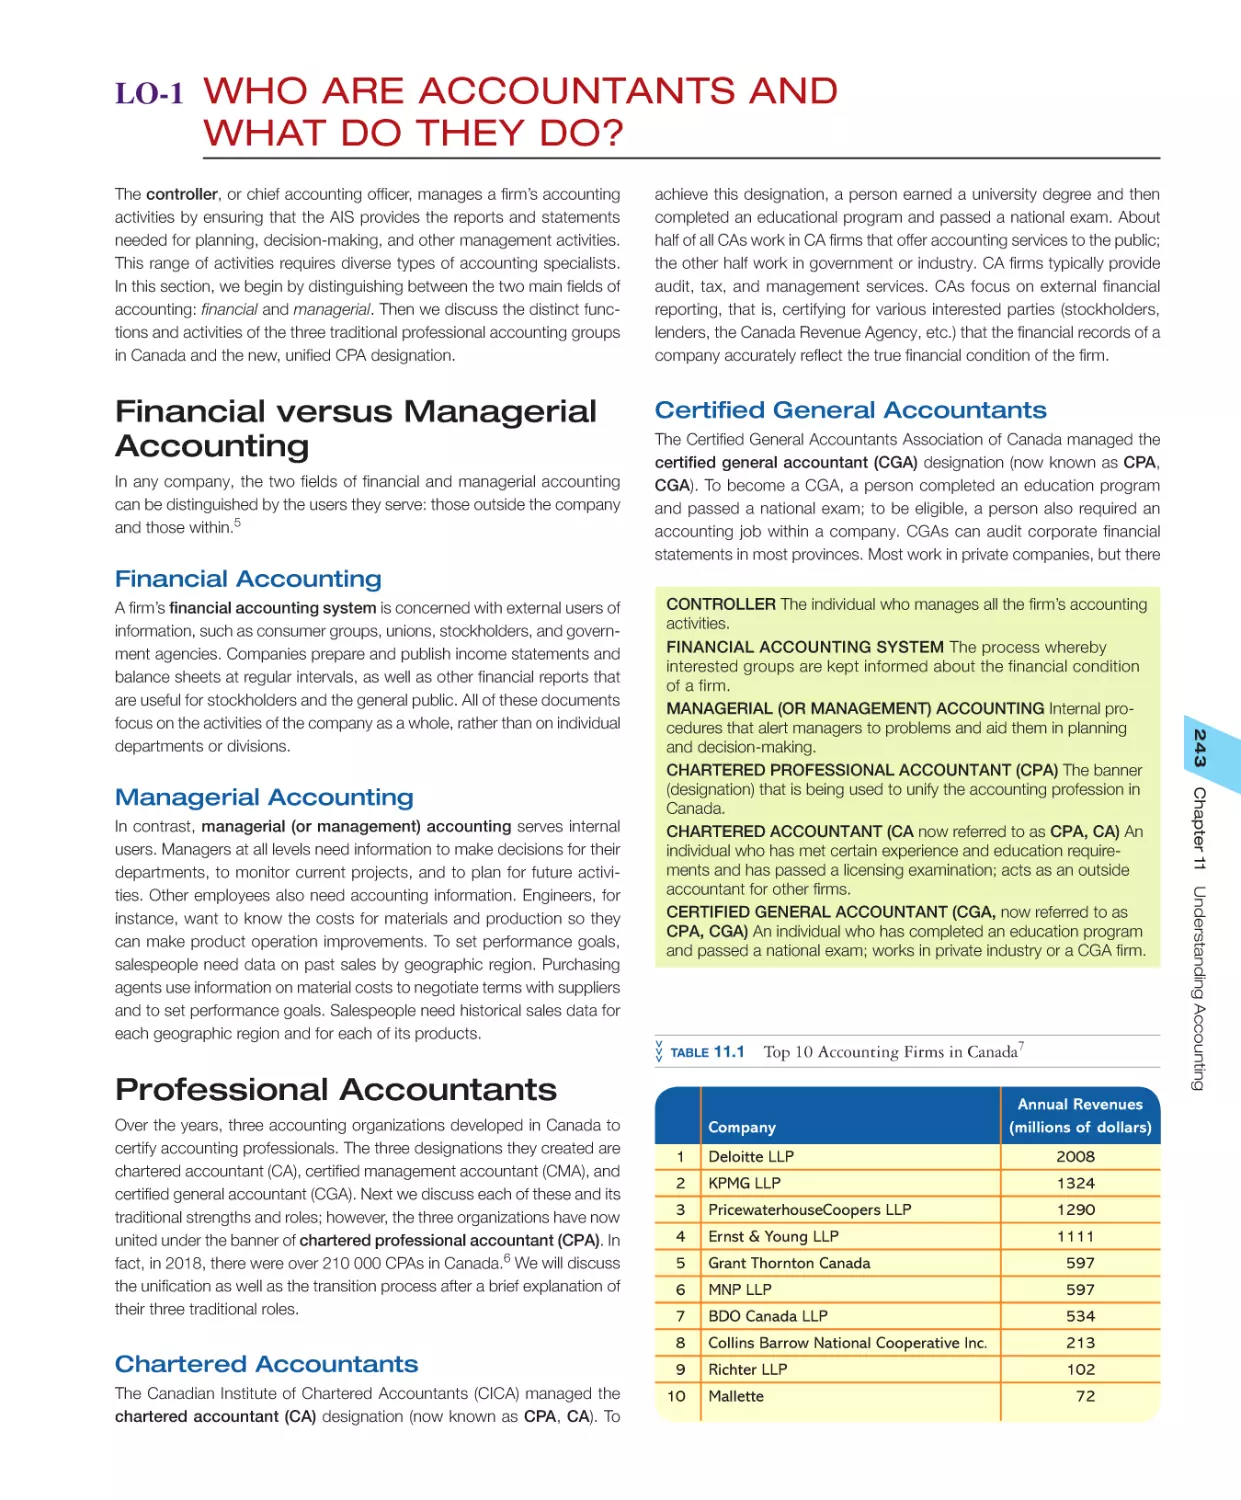 LO‐1 Who Are Accountants and What Do They Do?
Professional Accountants